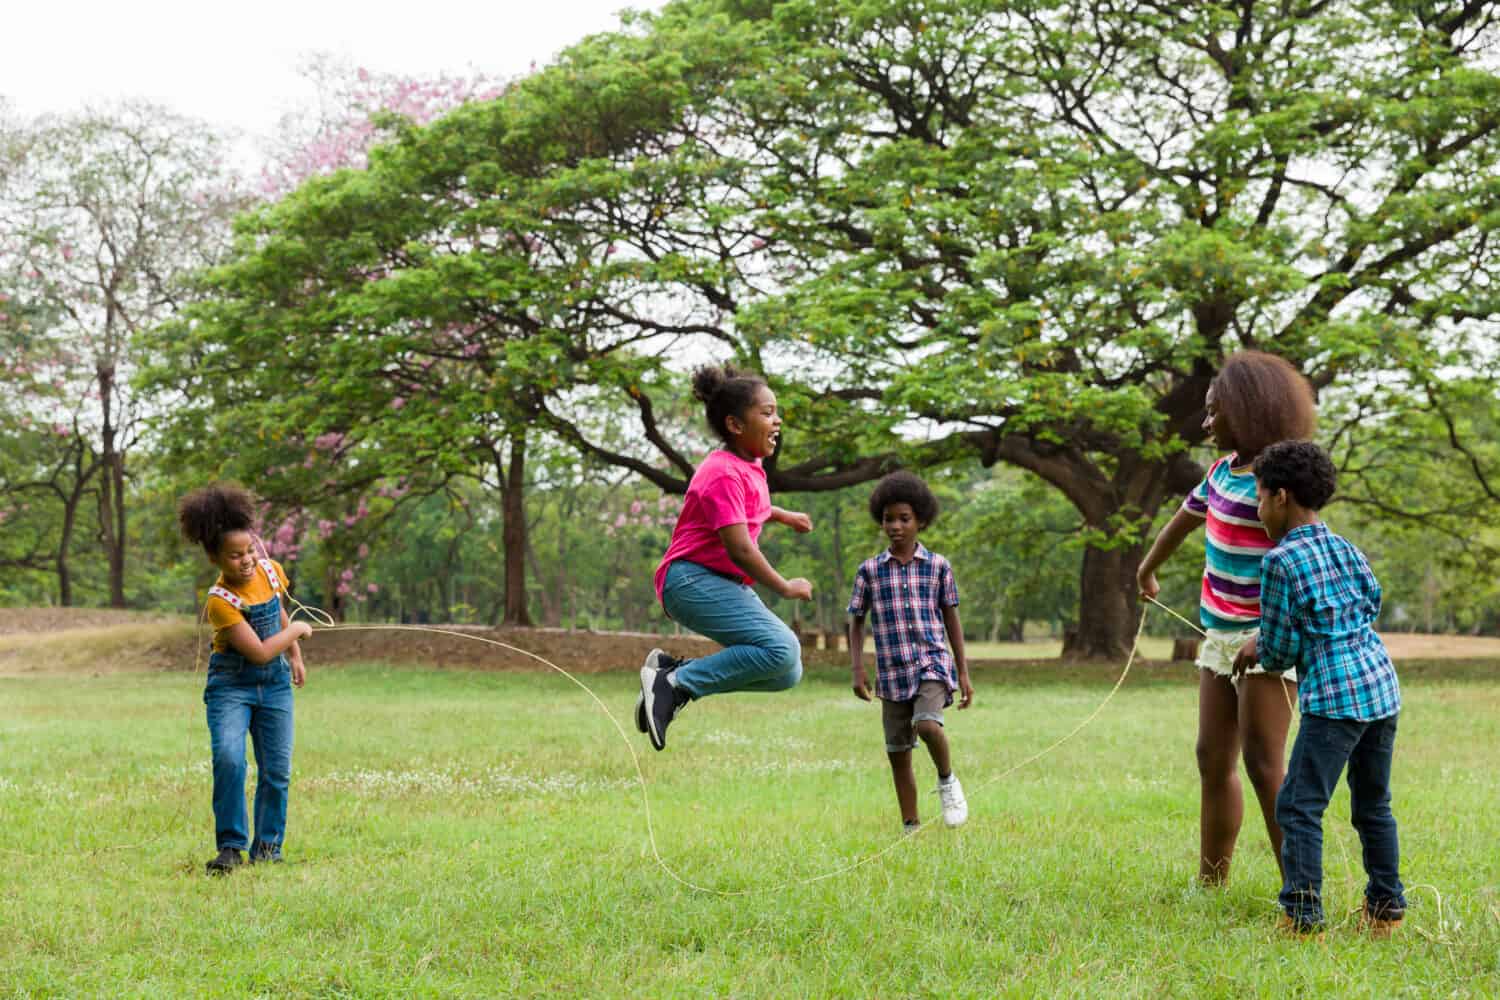 Group of African American children having fun jumping over the rope in the park. Cheerful kid jumping over the rope outdoor. Happy black people enjoying playing together on green grass